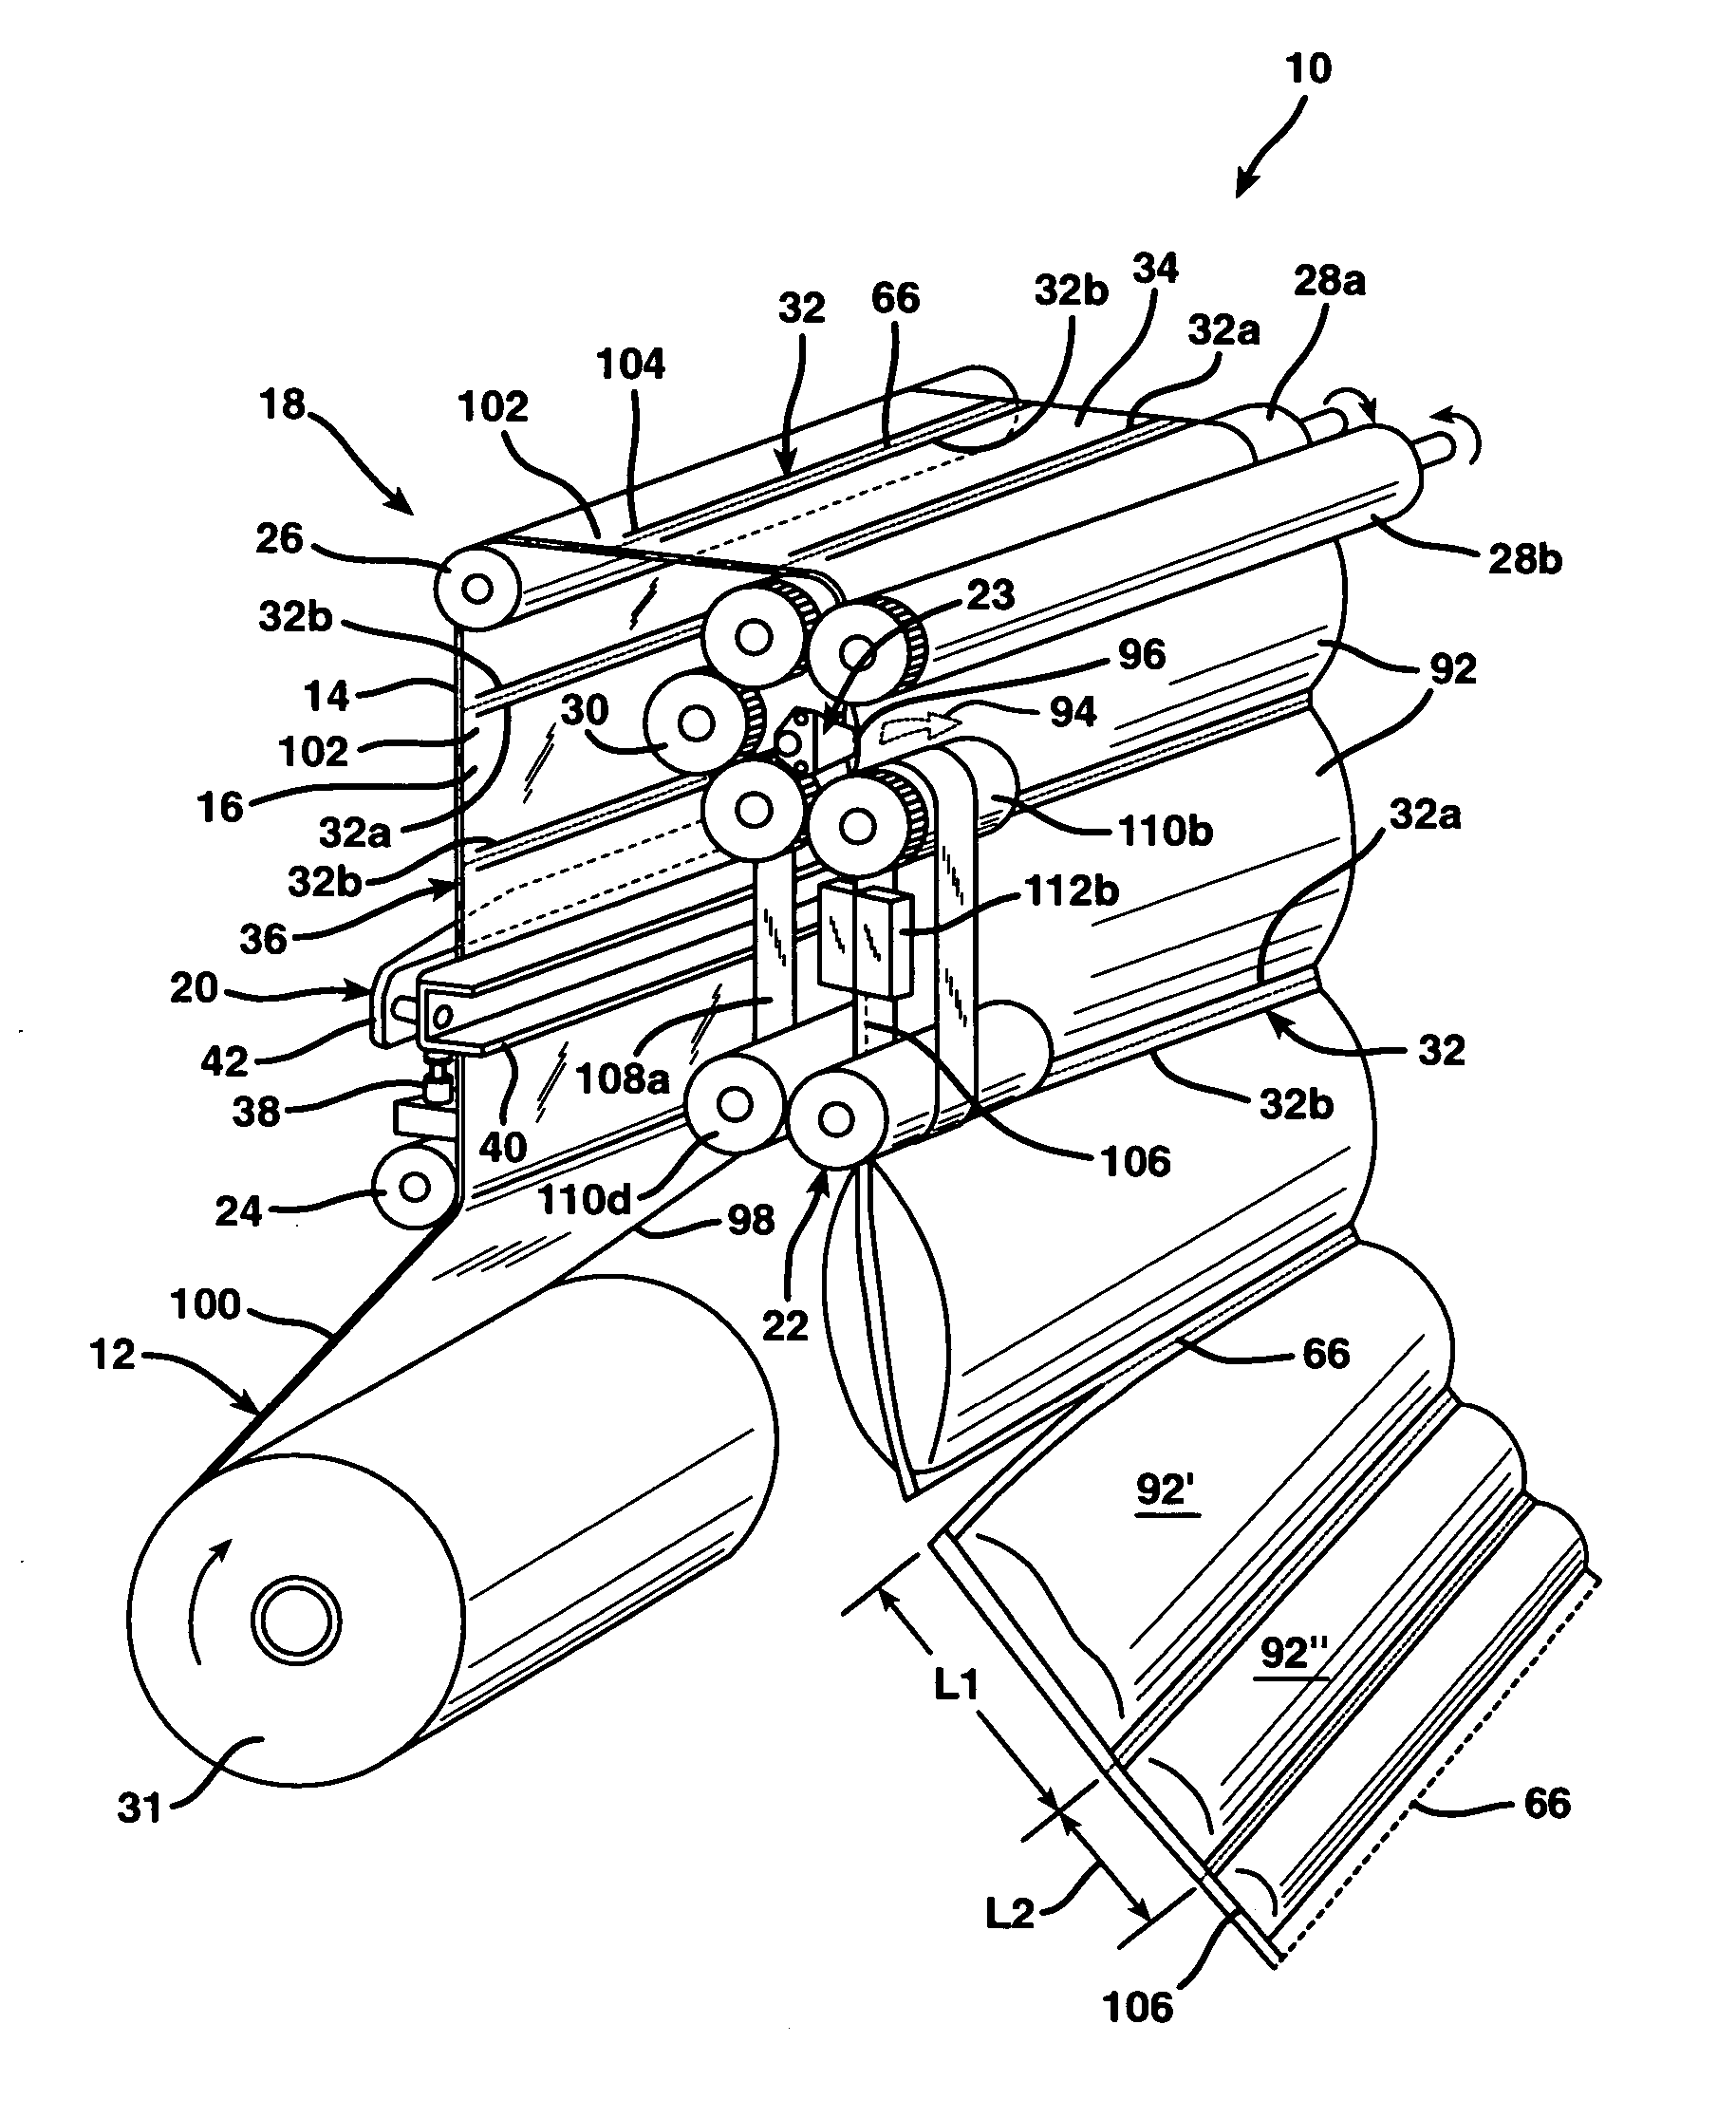 Apparatus and method for forming inflated containers